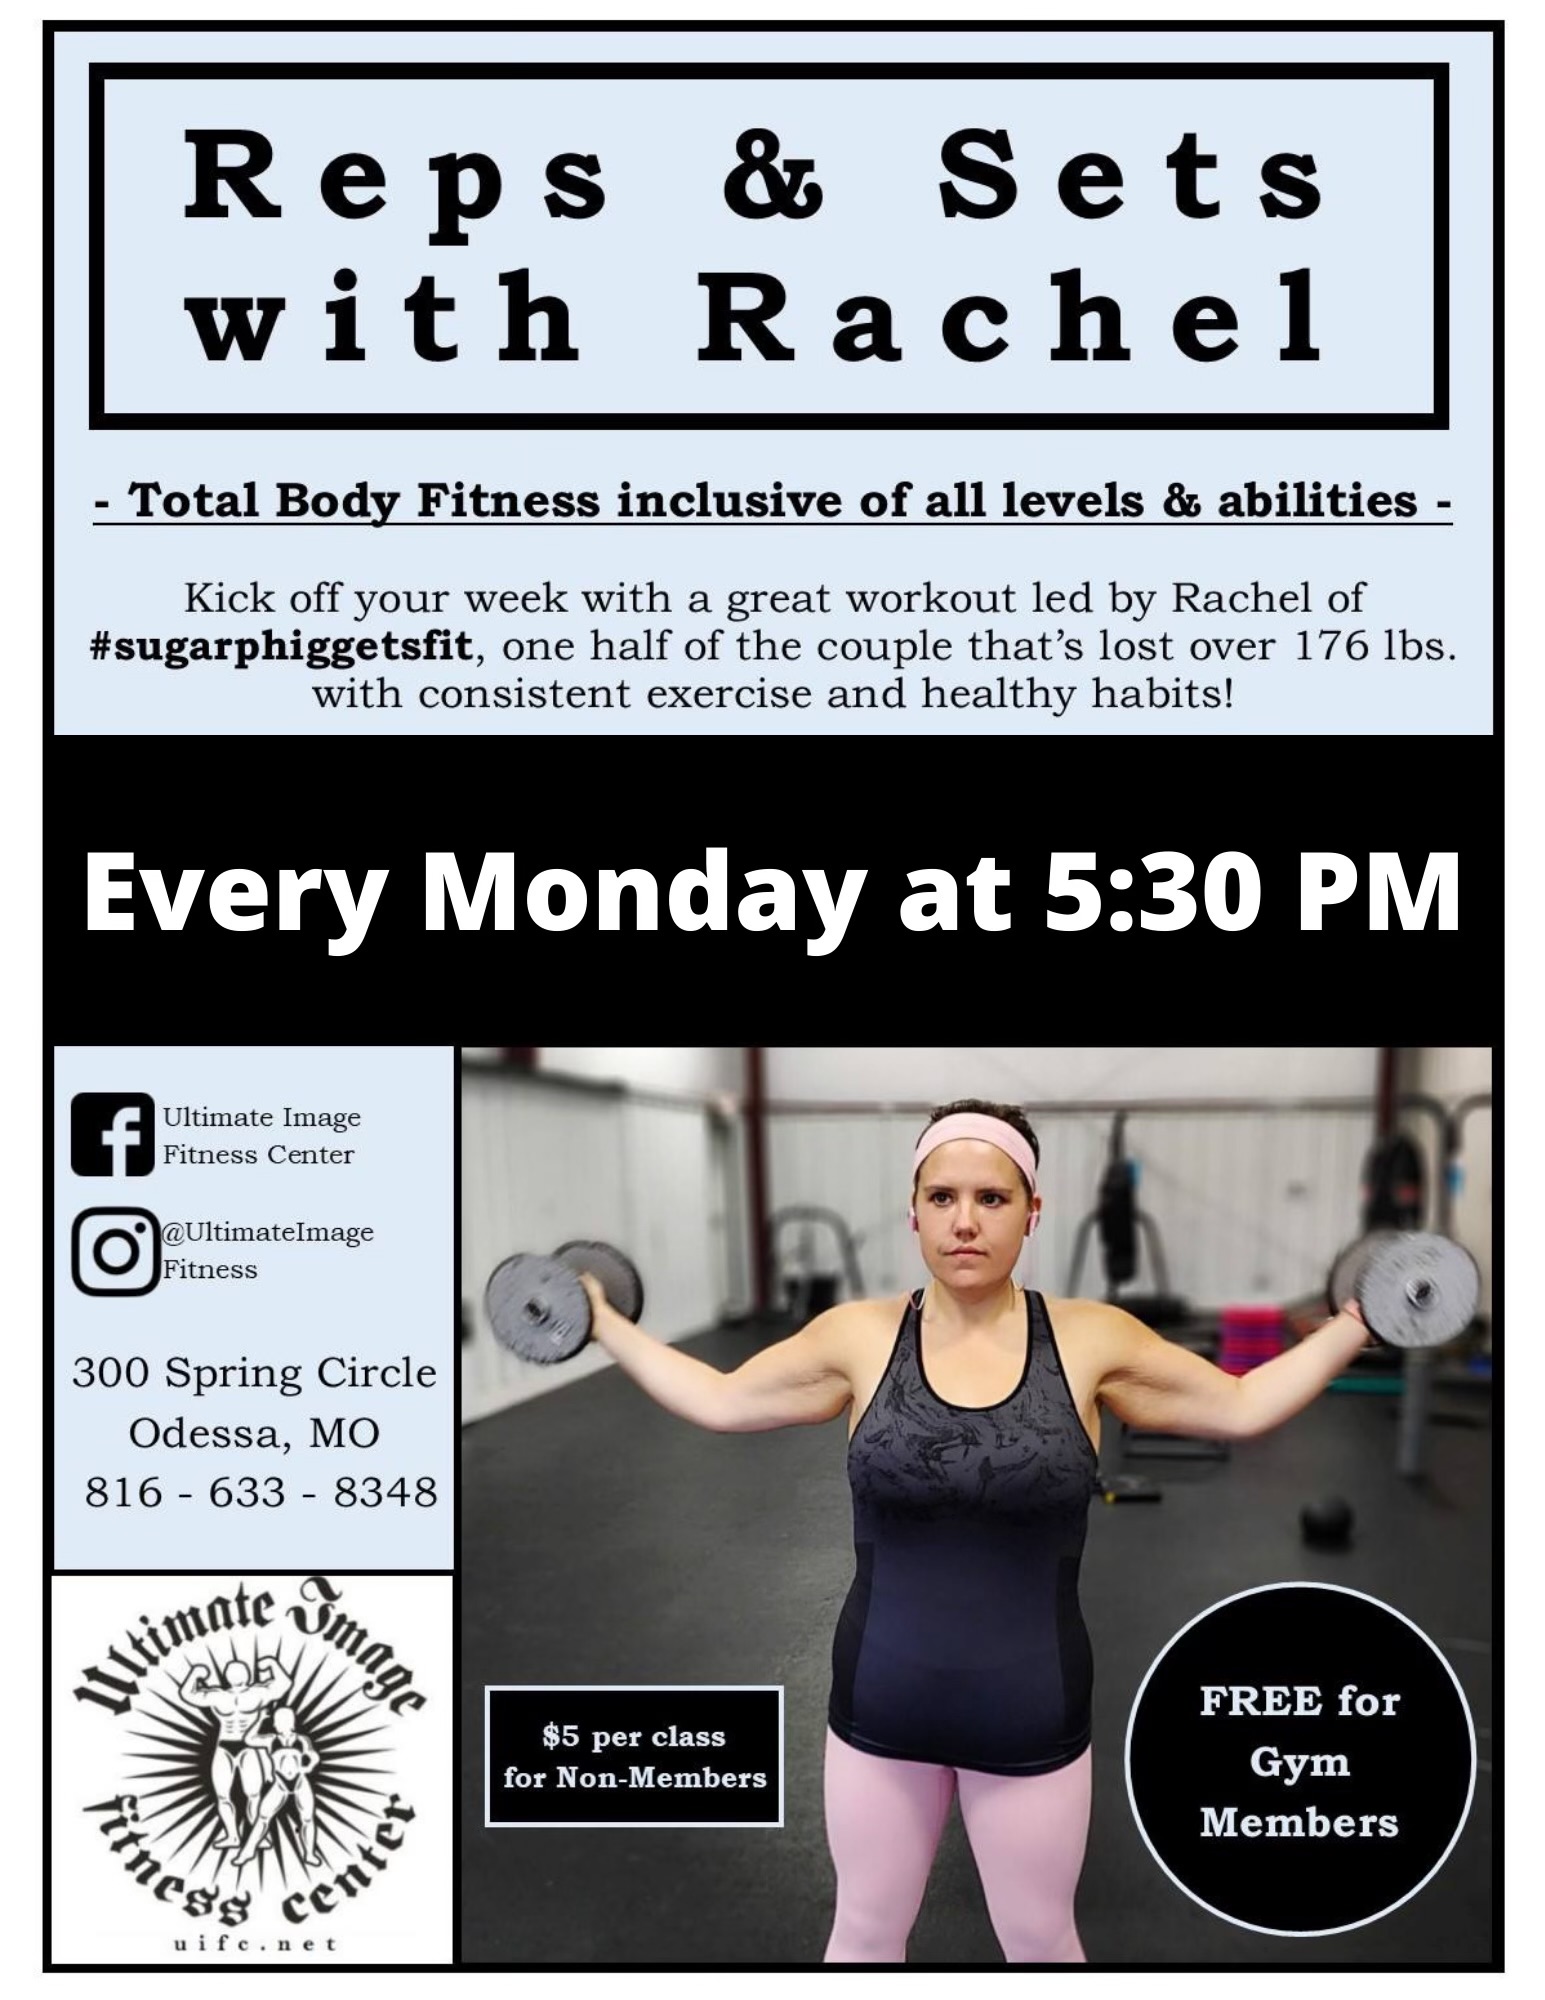 Rachel Reps and Sets